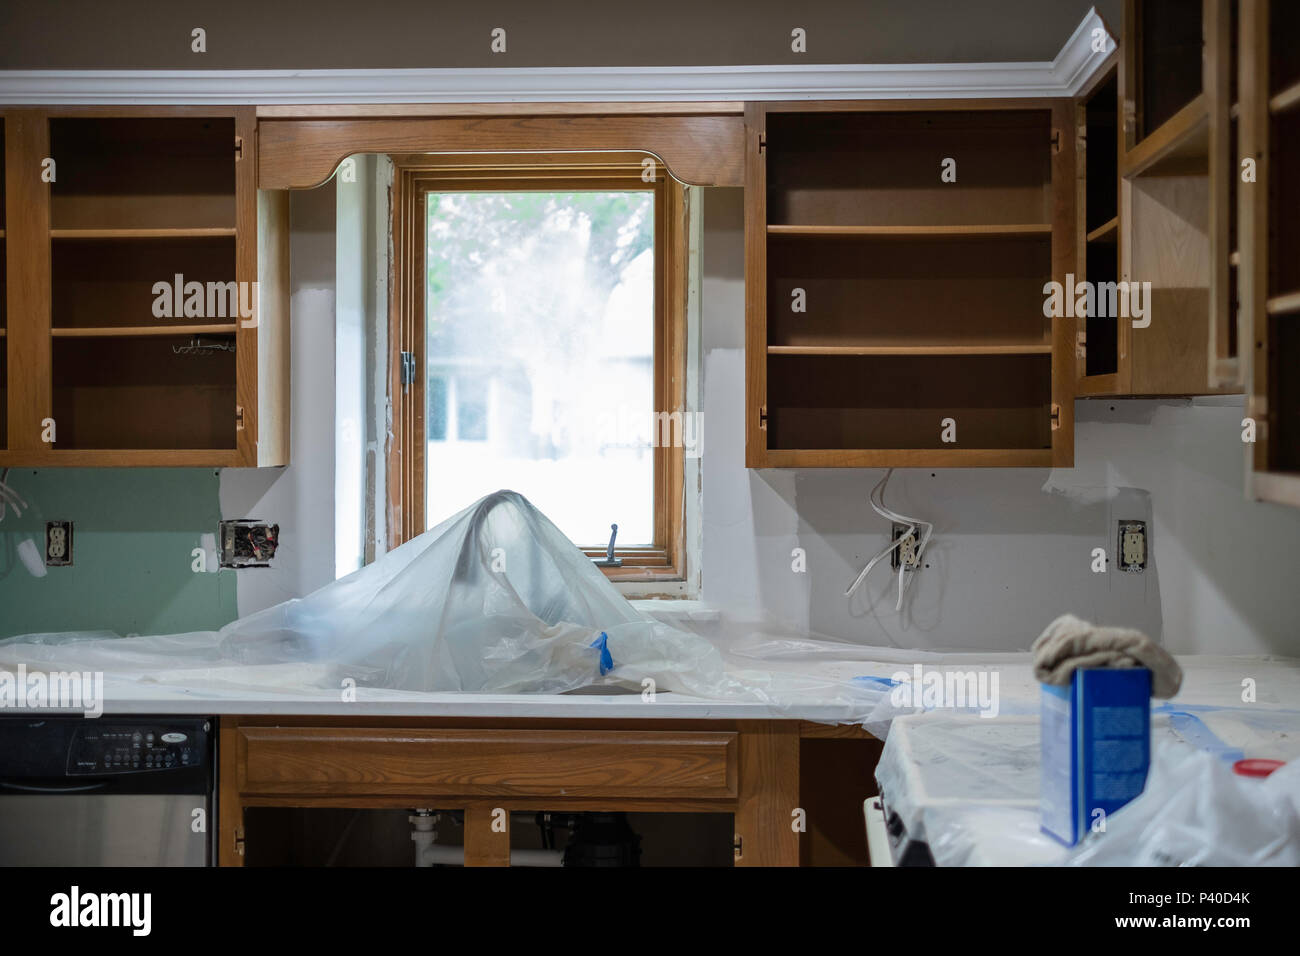 New Quartz Countertops Are Protected With Plastic Sheeting While A